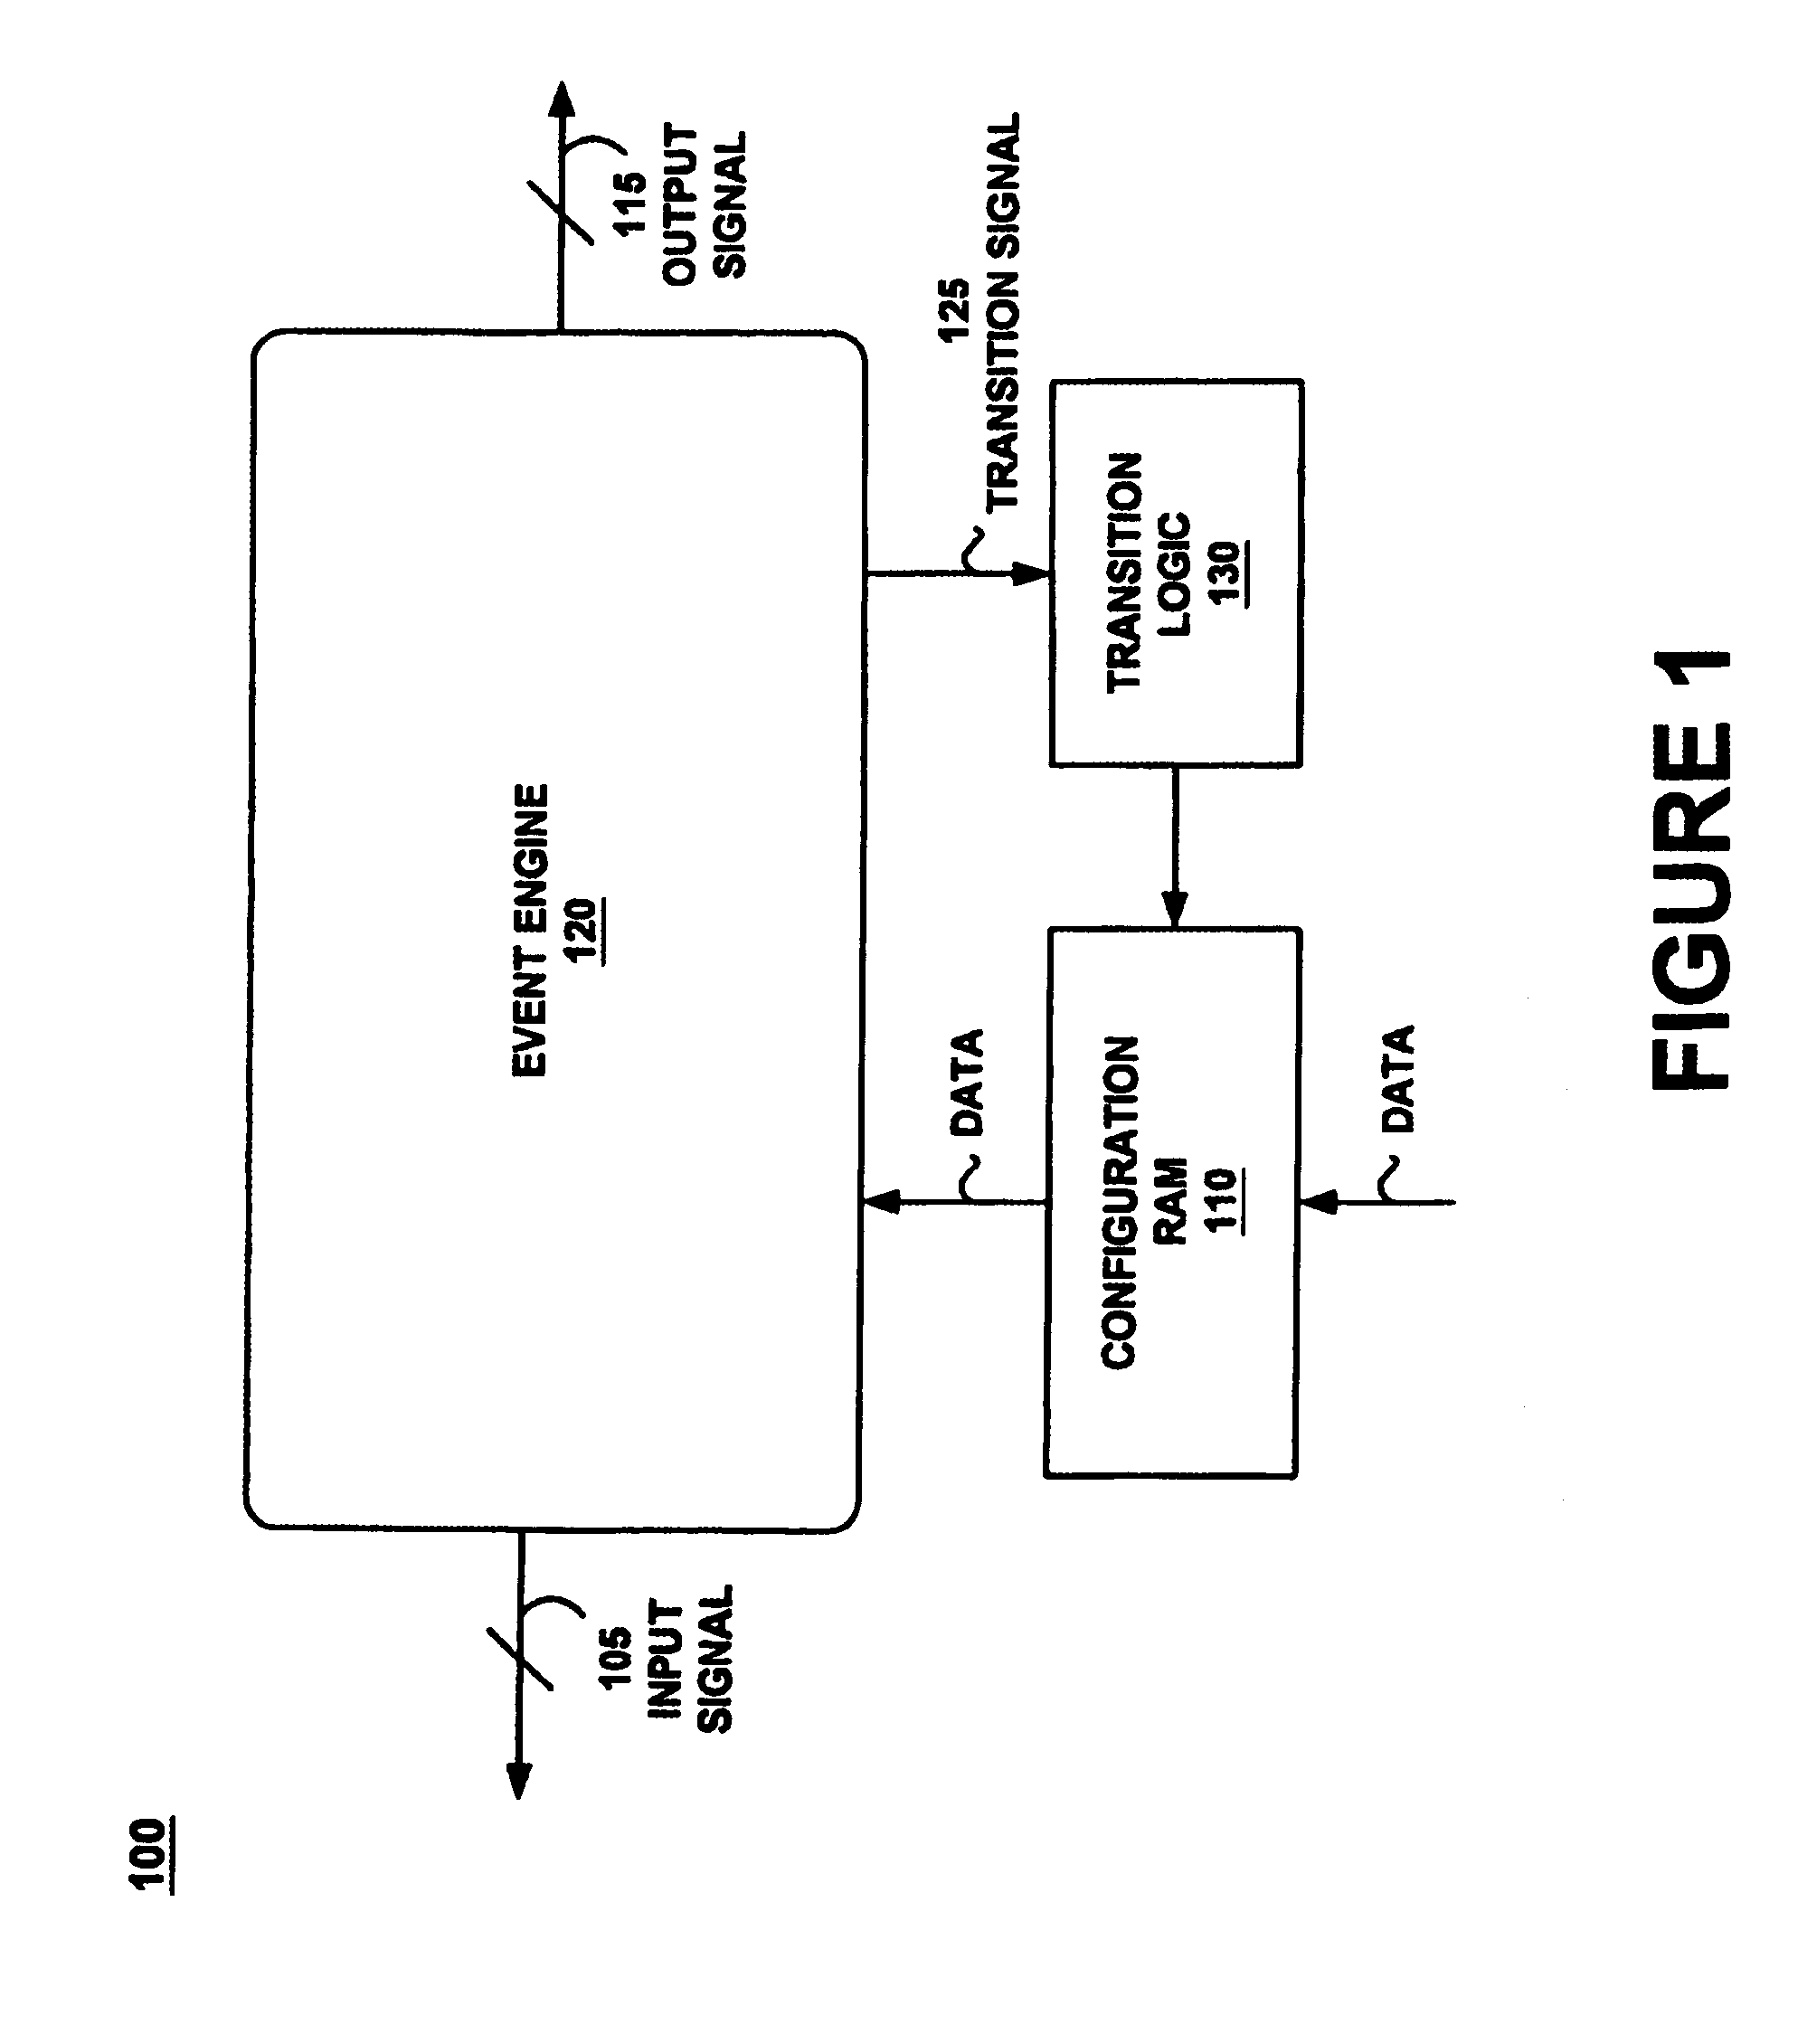 Graphical user interface with logic unifying functions